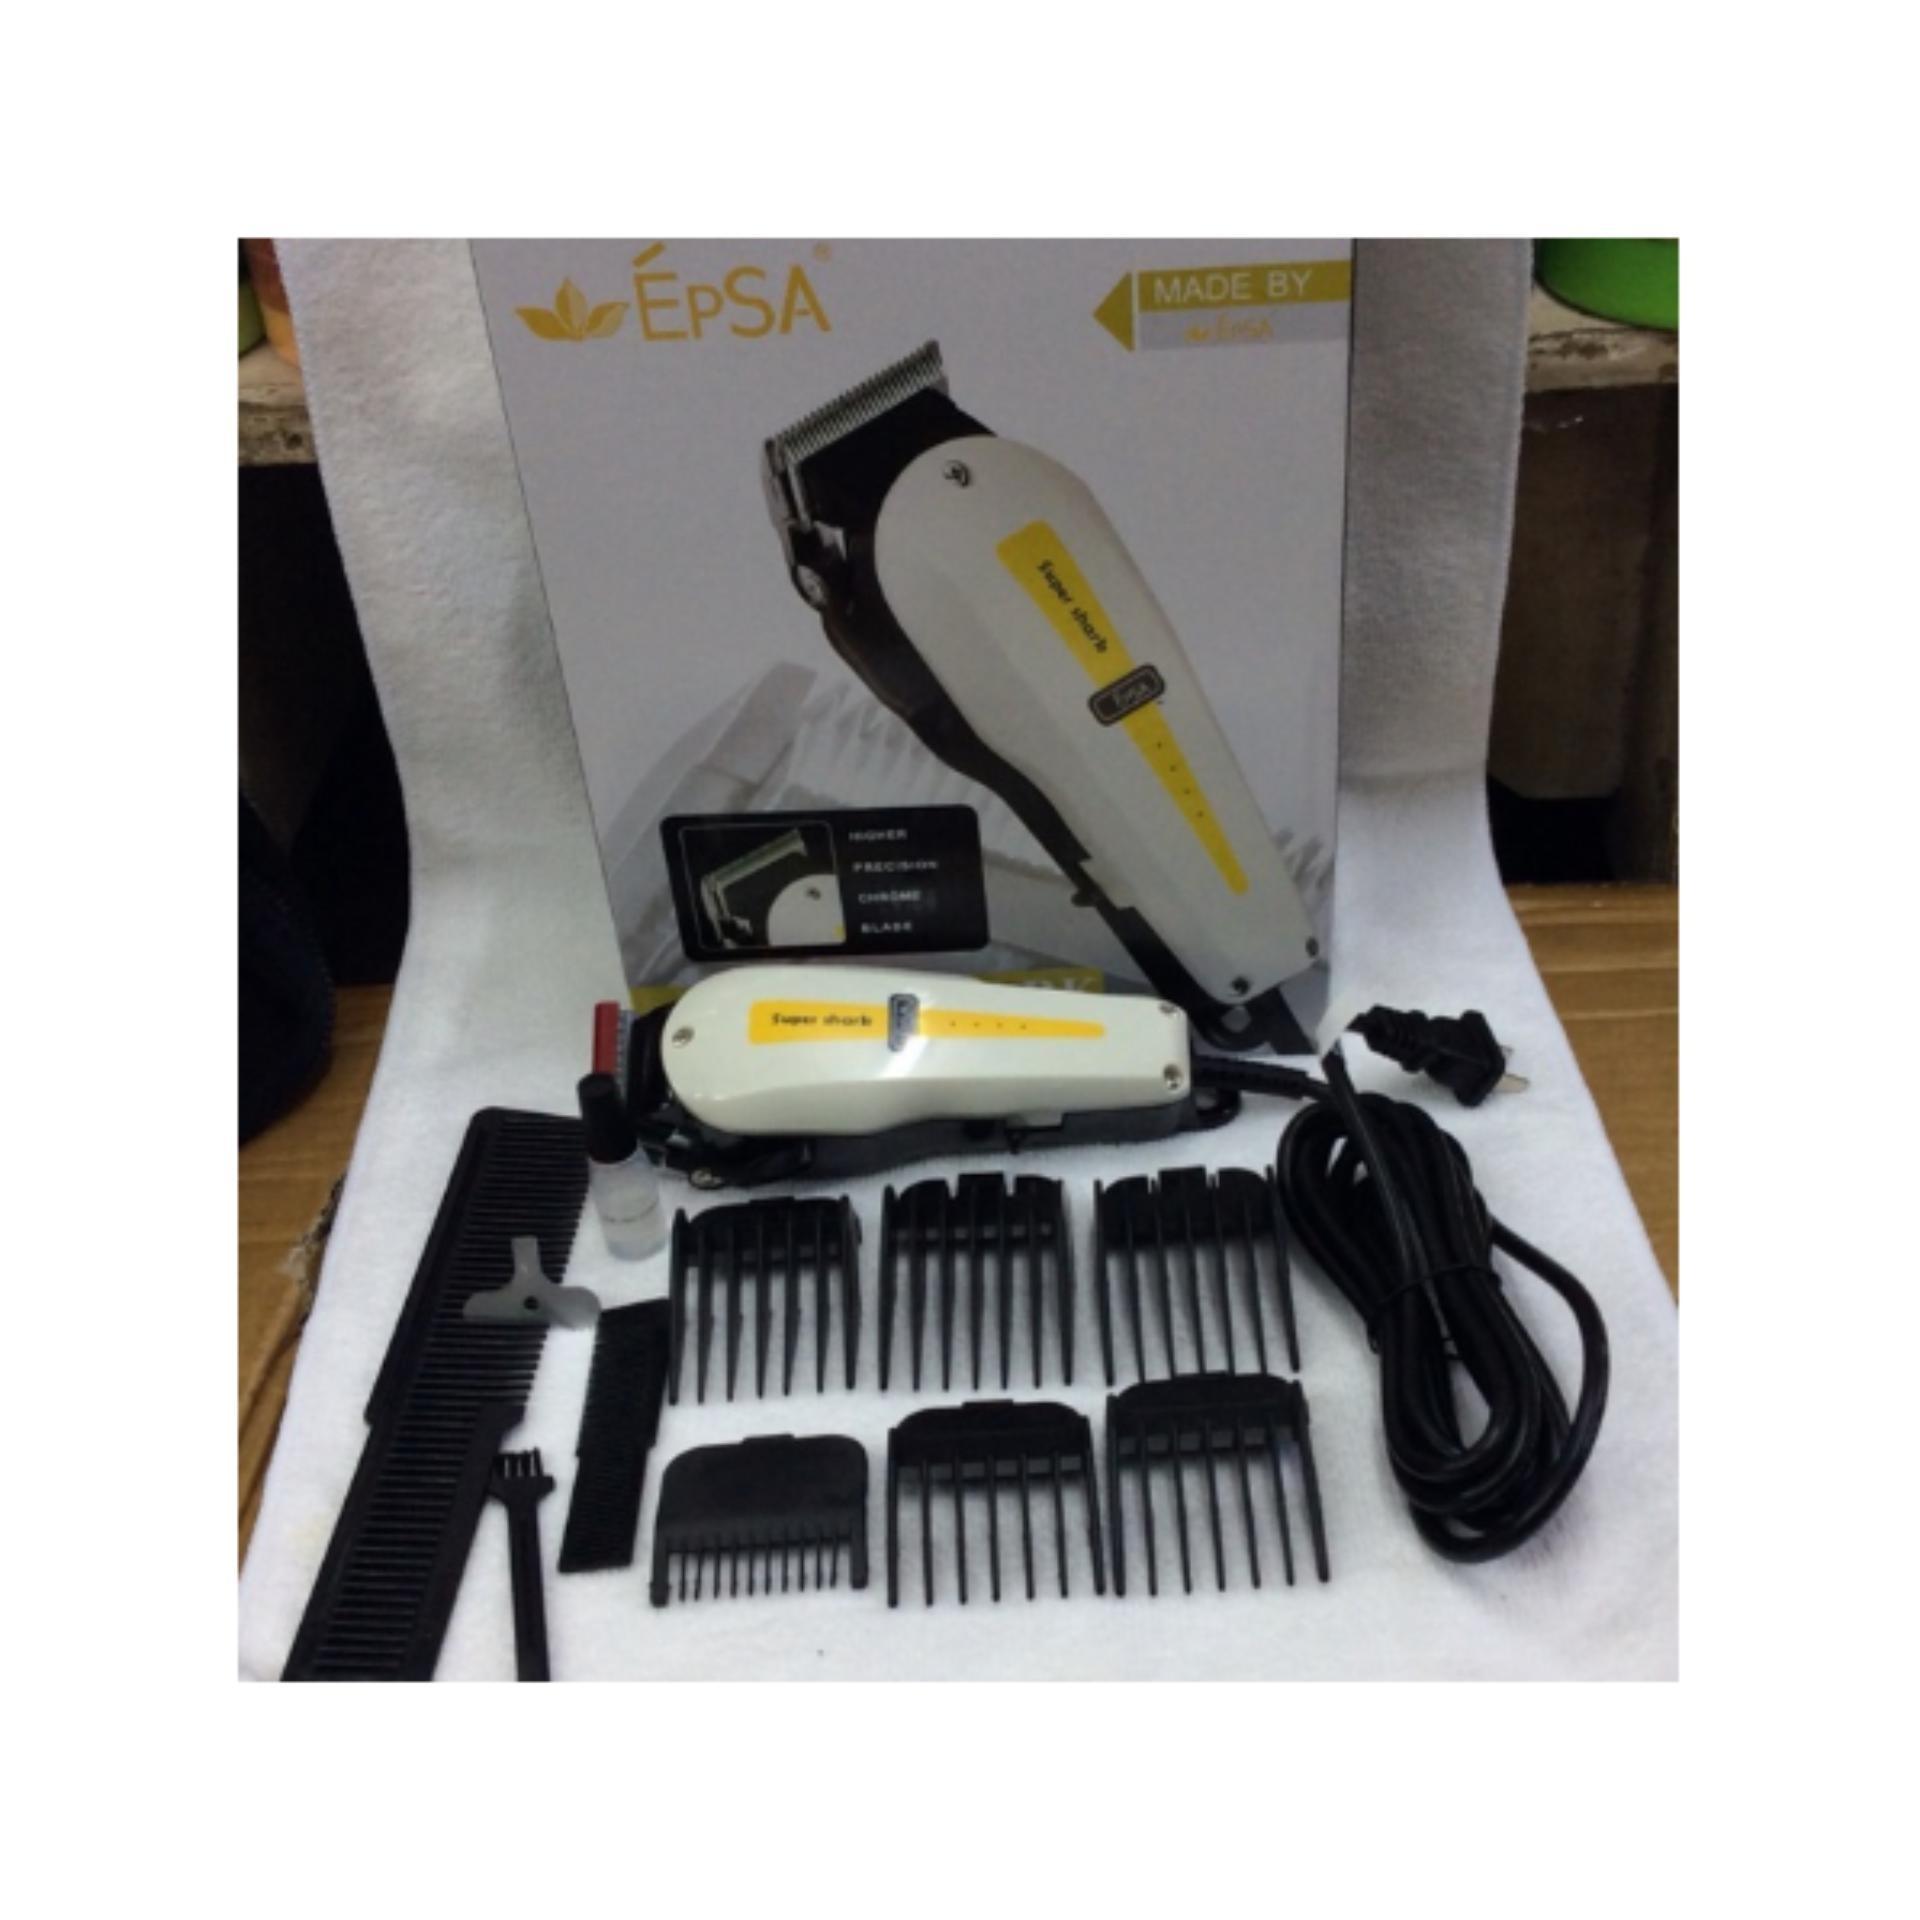 hair trimmers for sale